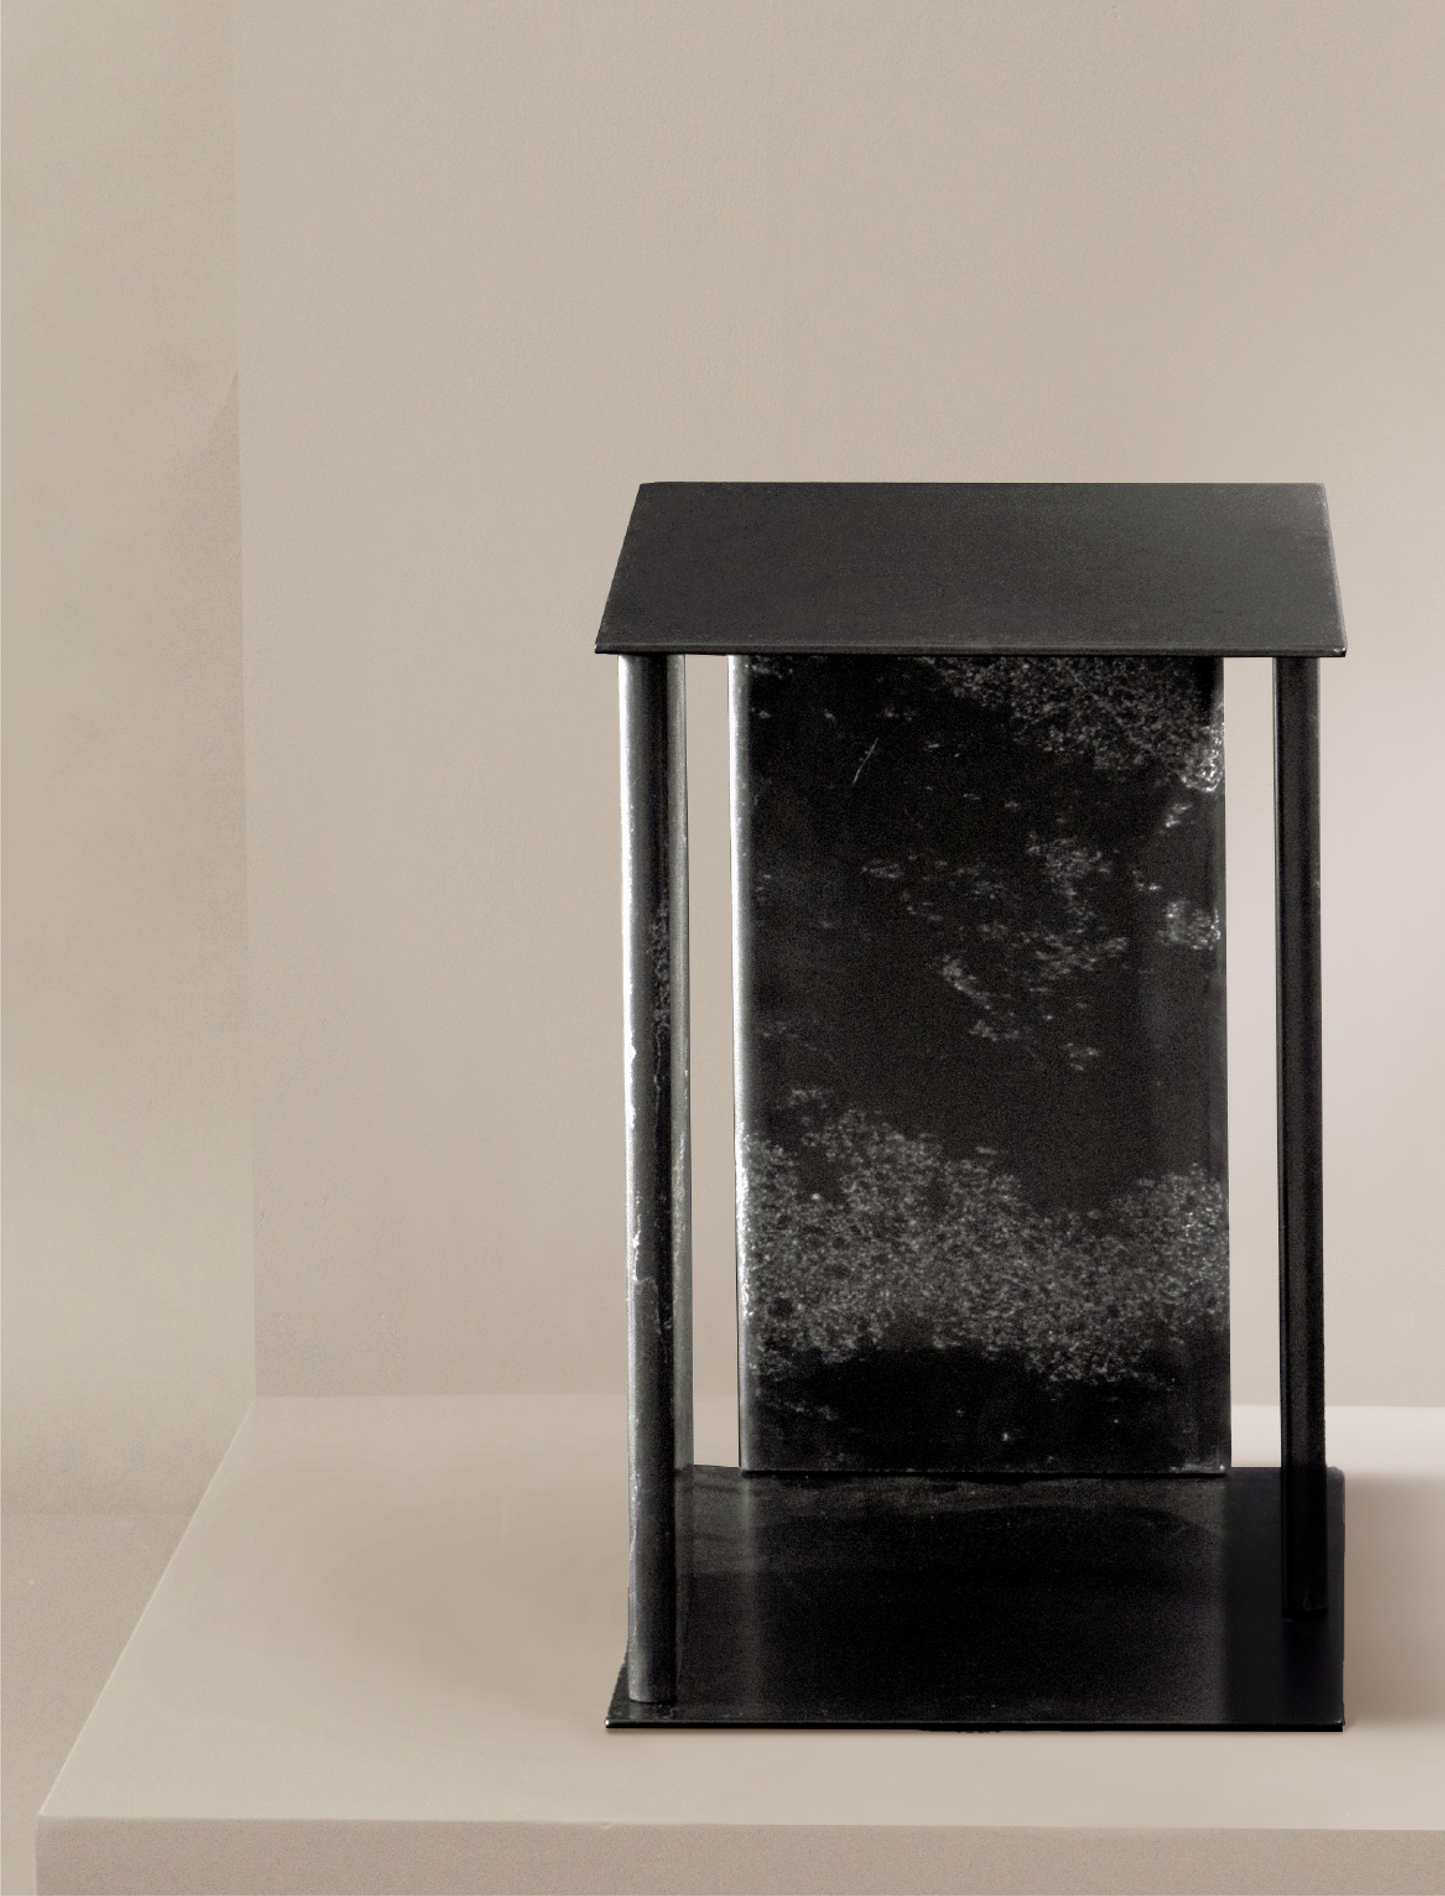 The TONY side table in black